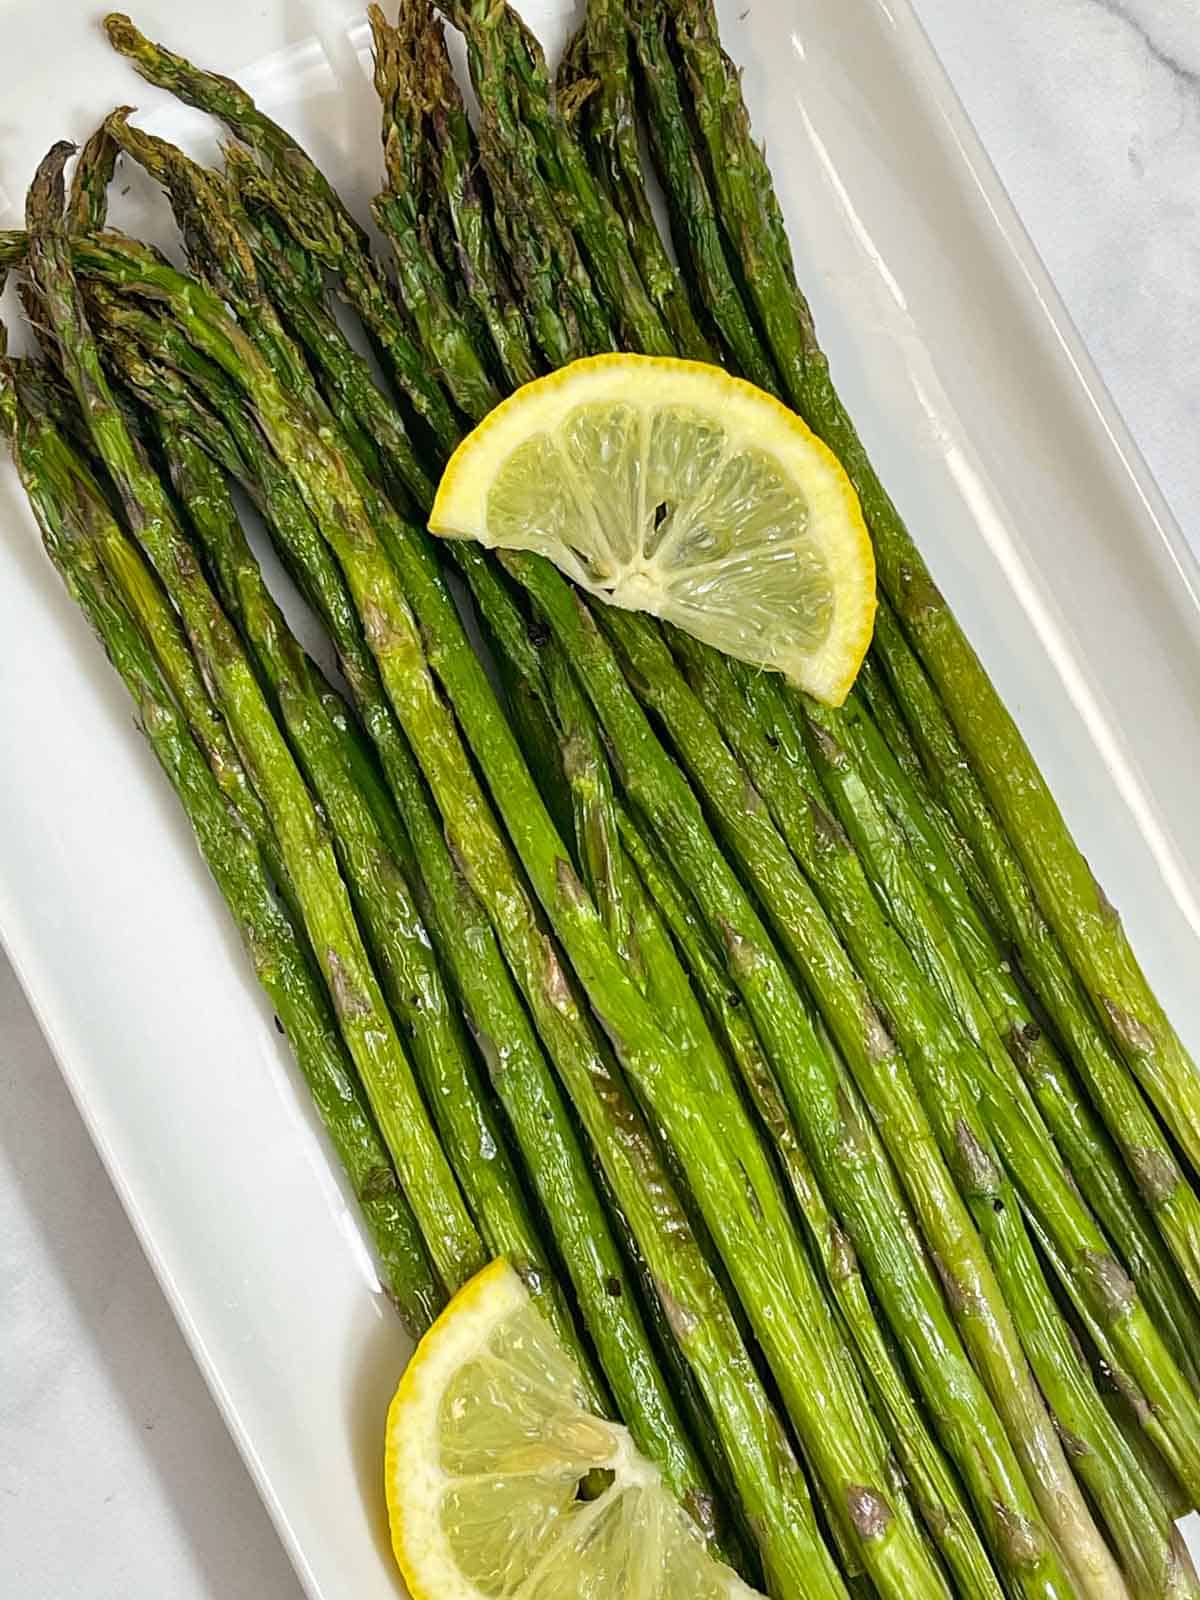 roasted air fryer asparagus served on a plate with two lemon wedges